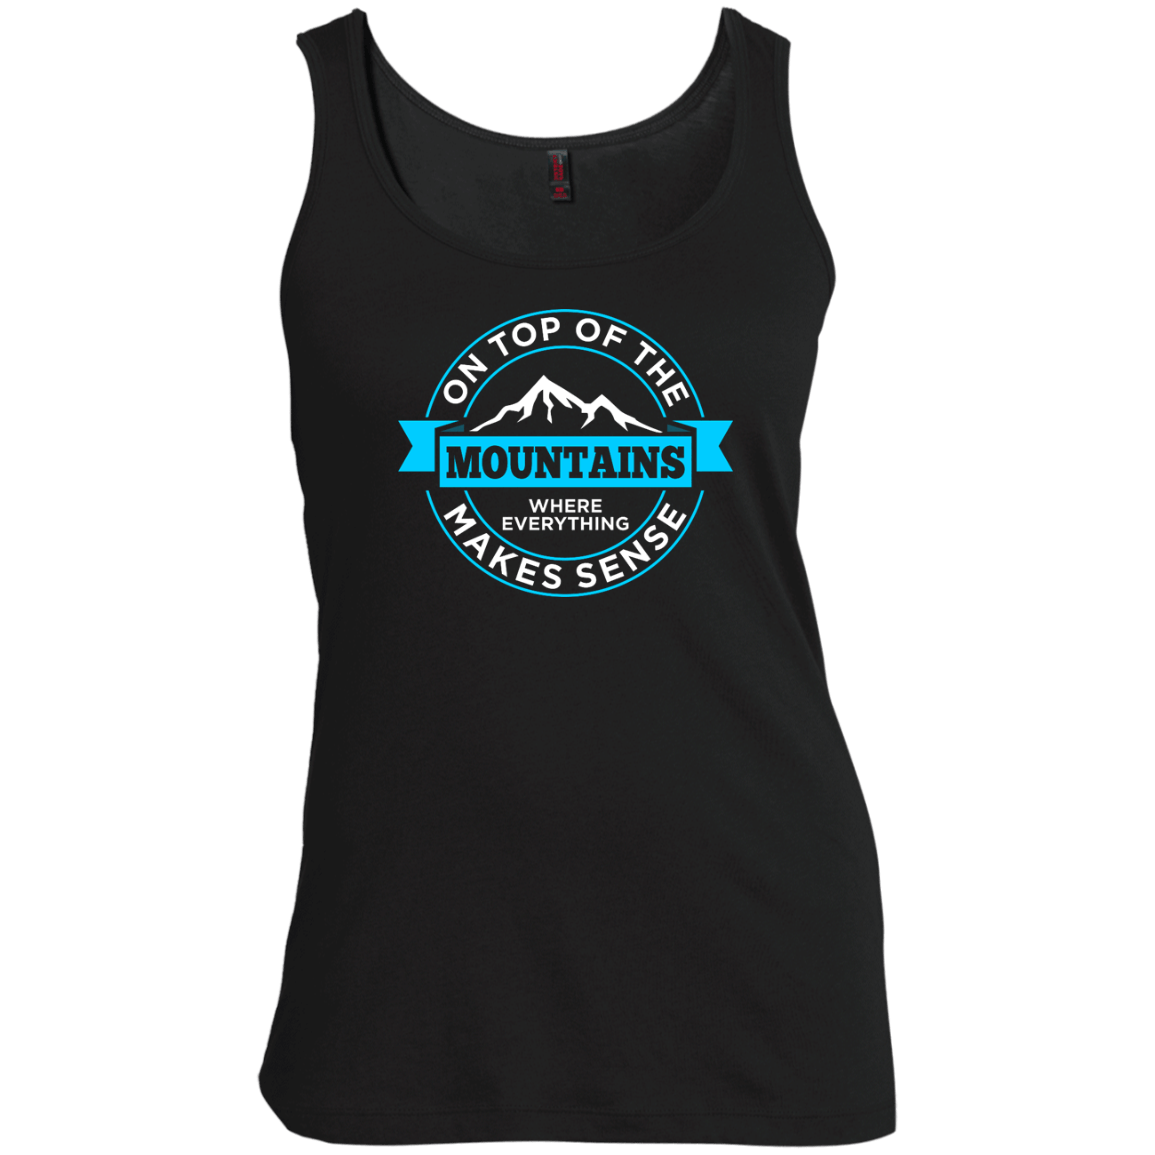 On Top Of The Mountains Where Everything Makes Sense Tank Tops - Powderaddicts